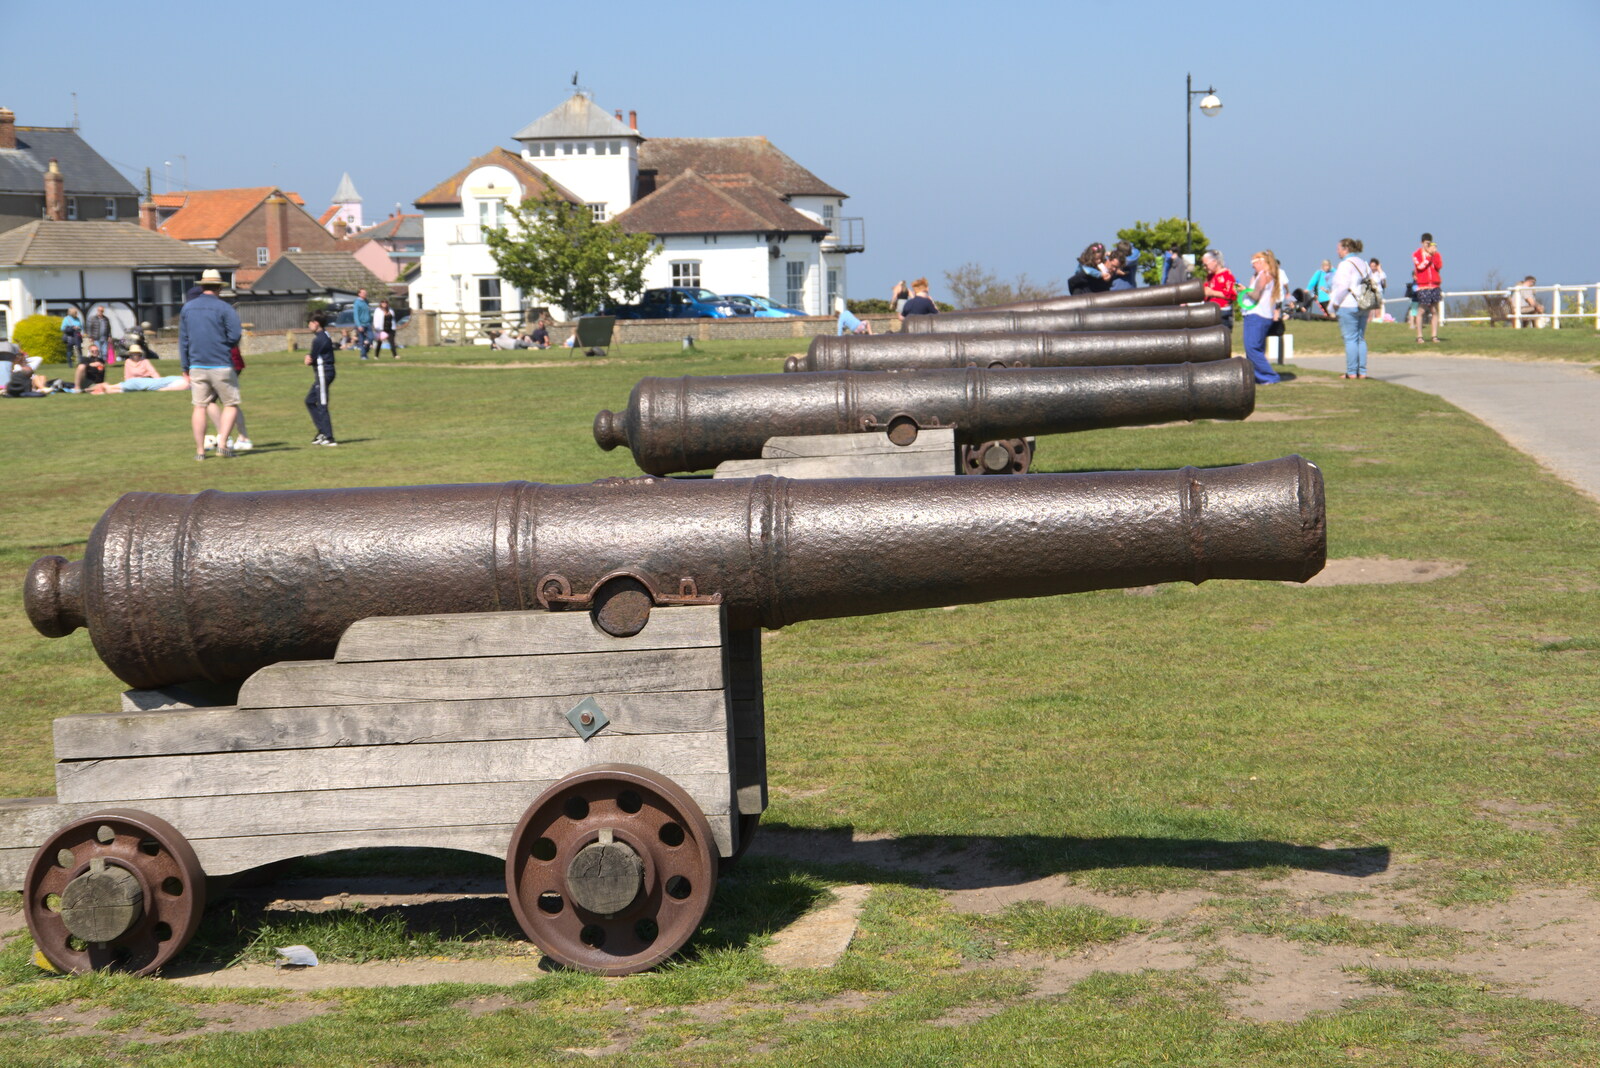 The cannon of Gun Hill from A Day at the Beach with Sis, Southwold, Suffolk - 31st May 2021